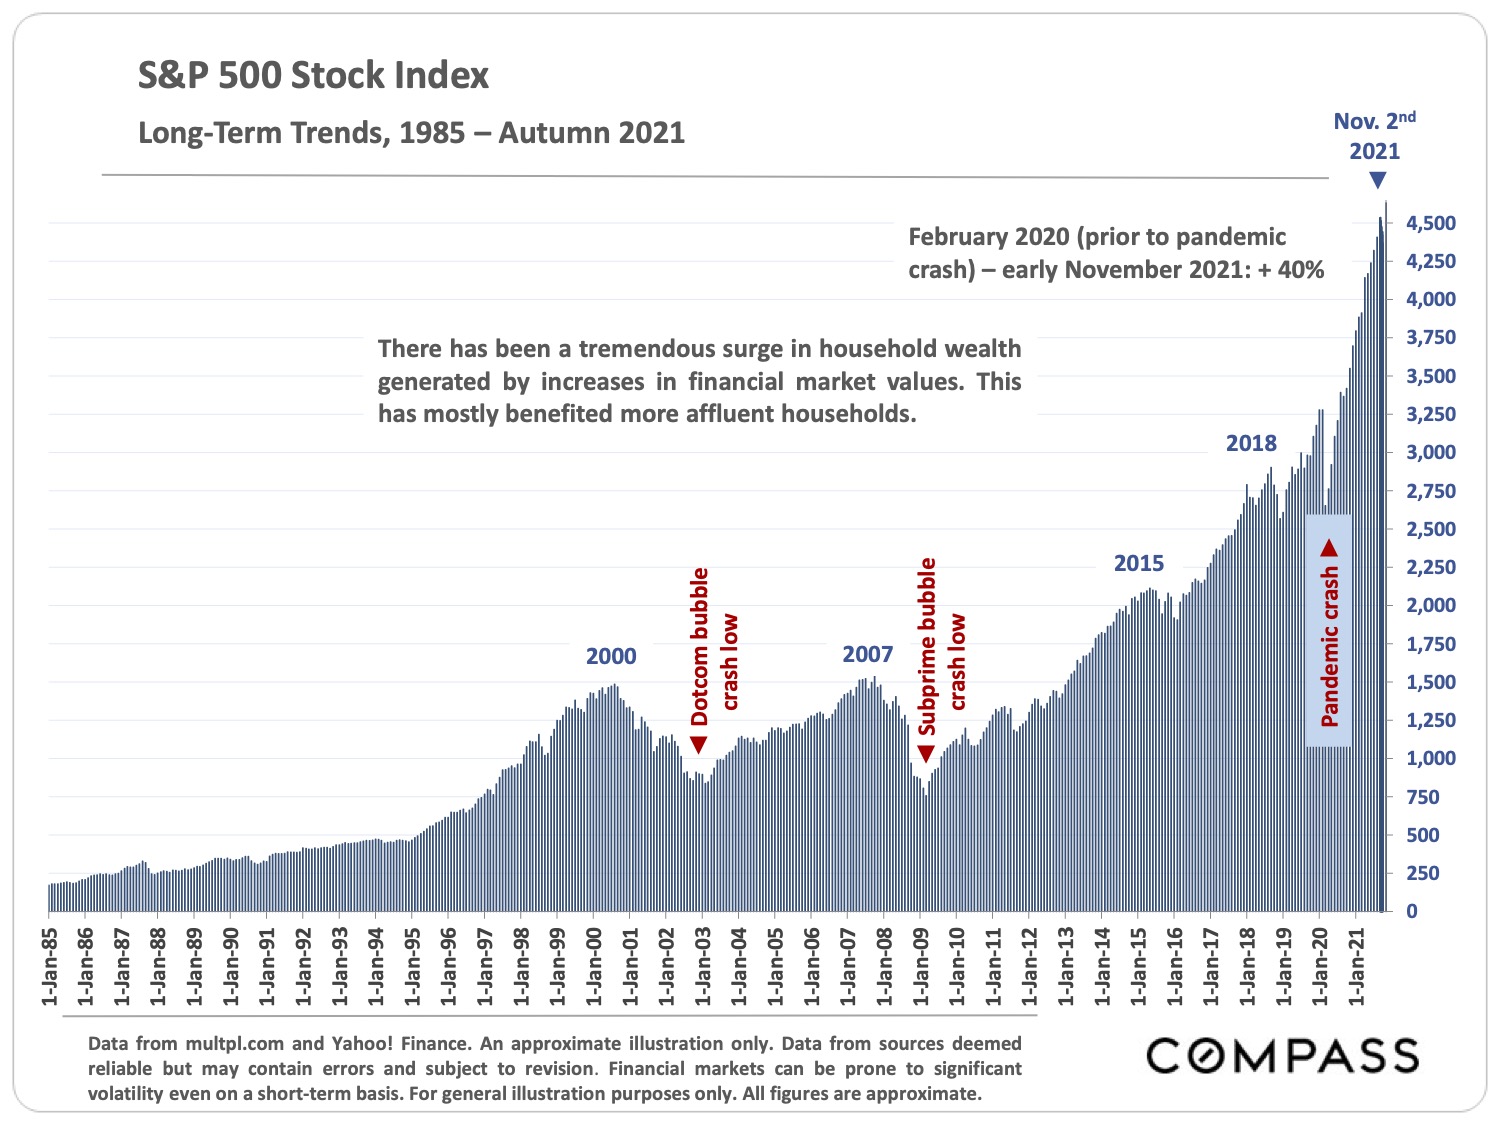 S&P 500 Stock Index Long-Term Trends, 1985 – Autumn 2021 page 21 of San Francisco Real Estate Market Report November 2021